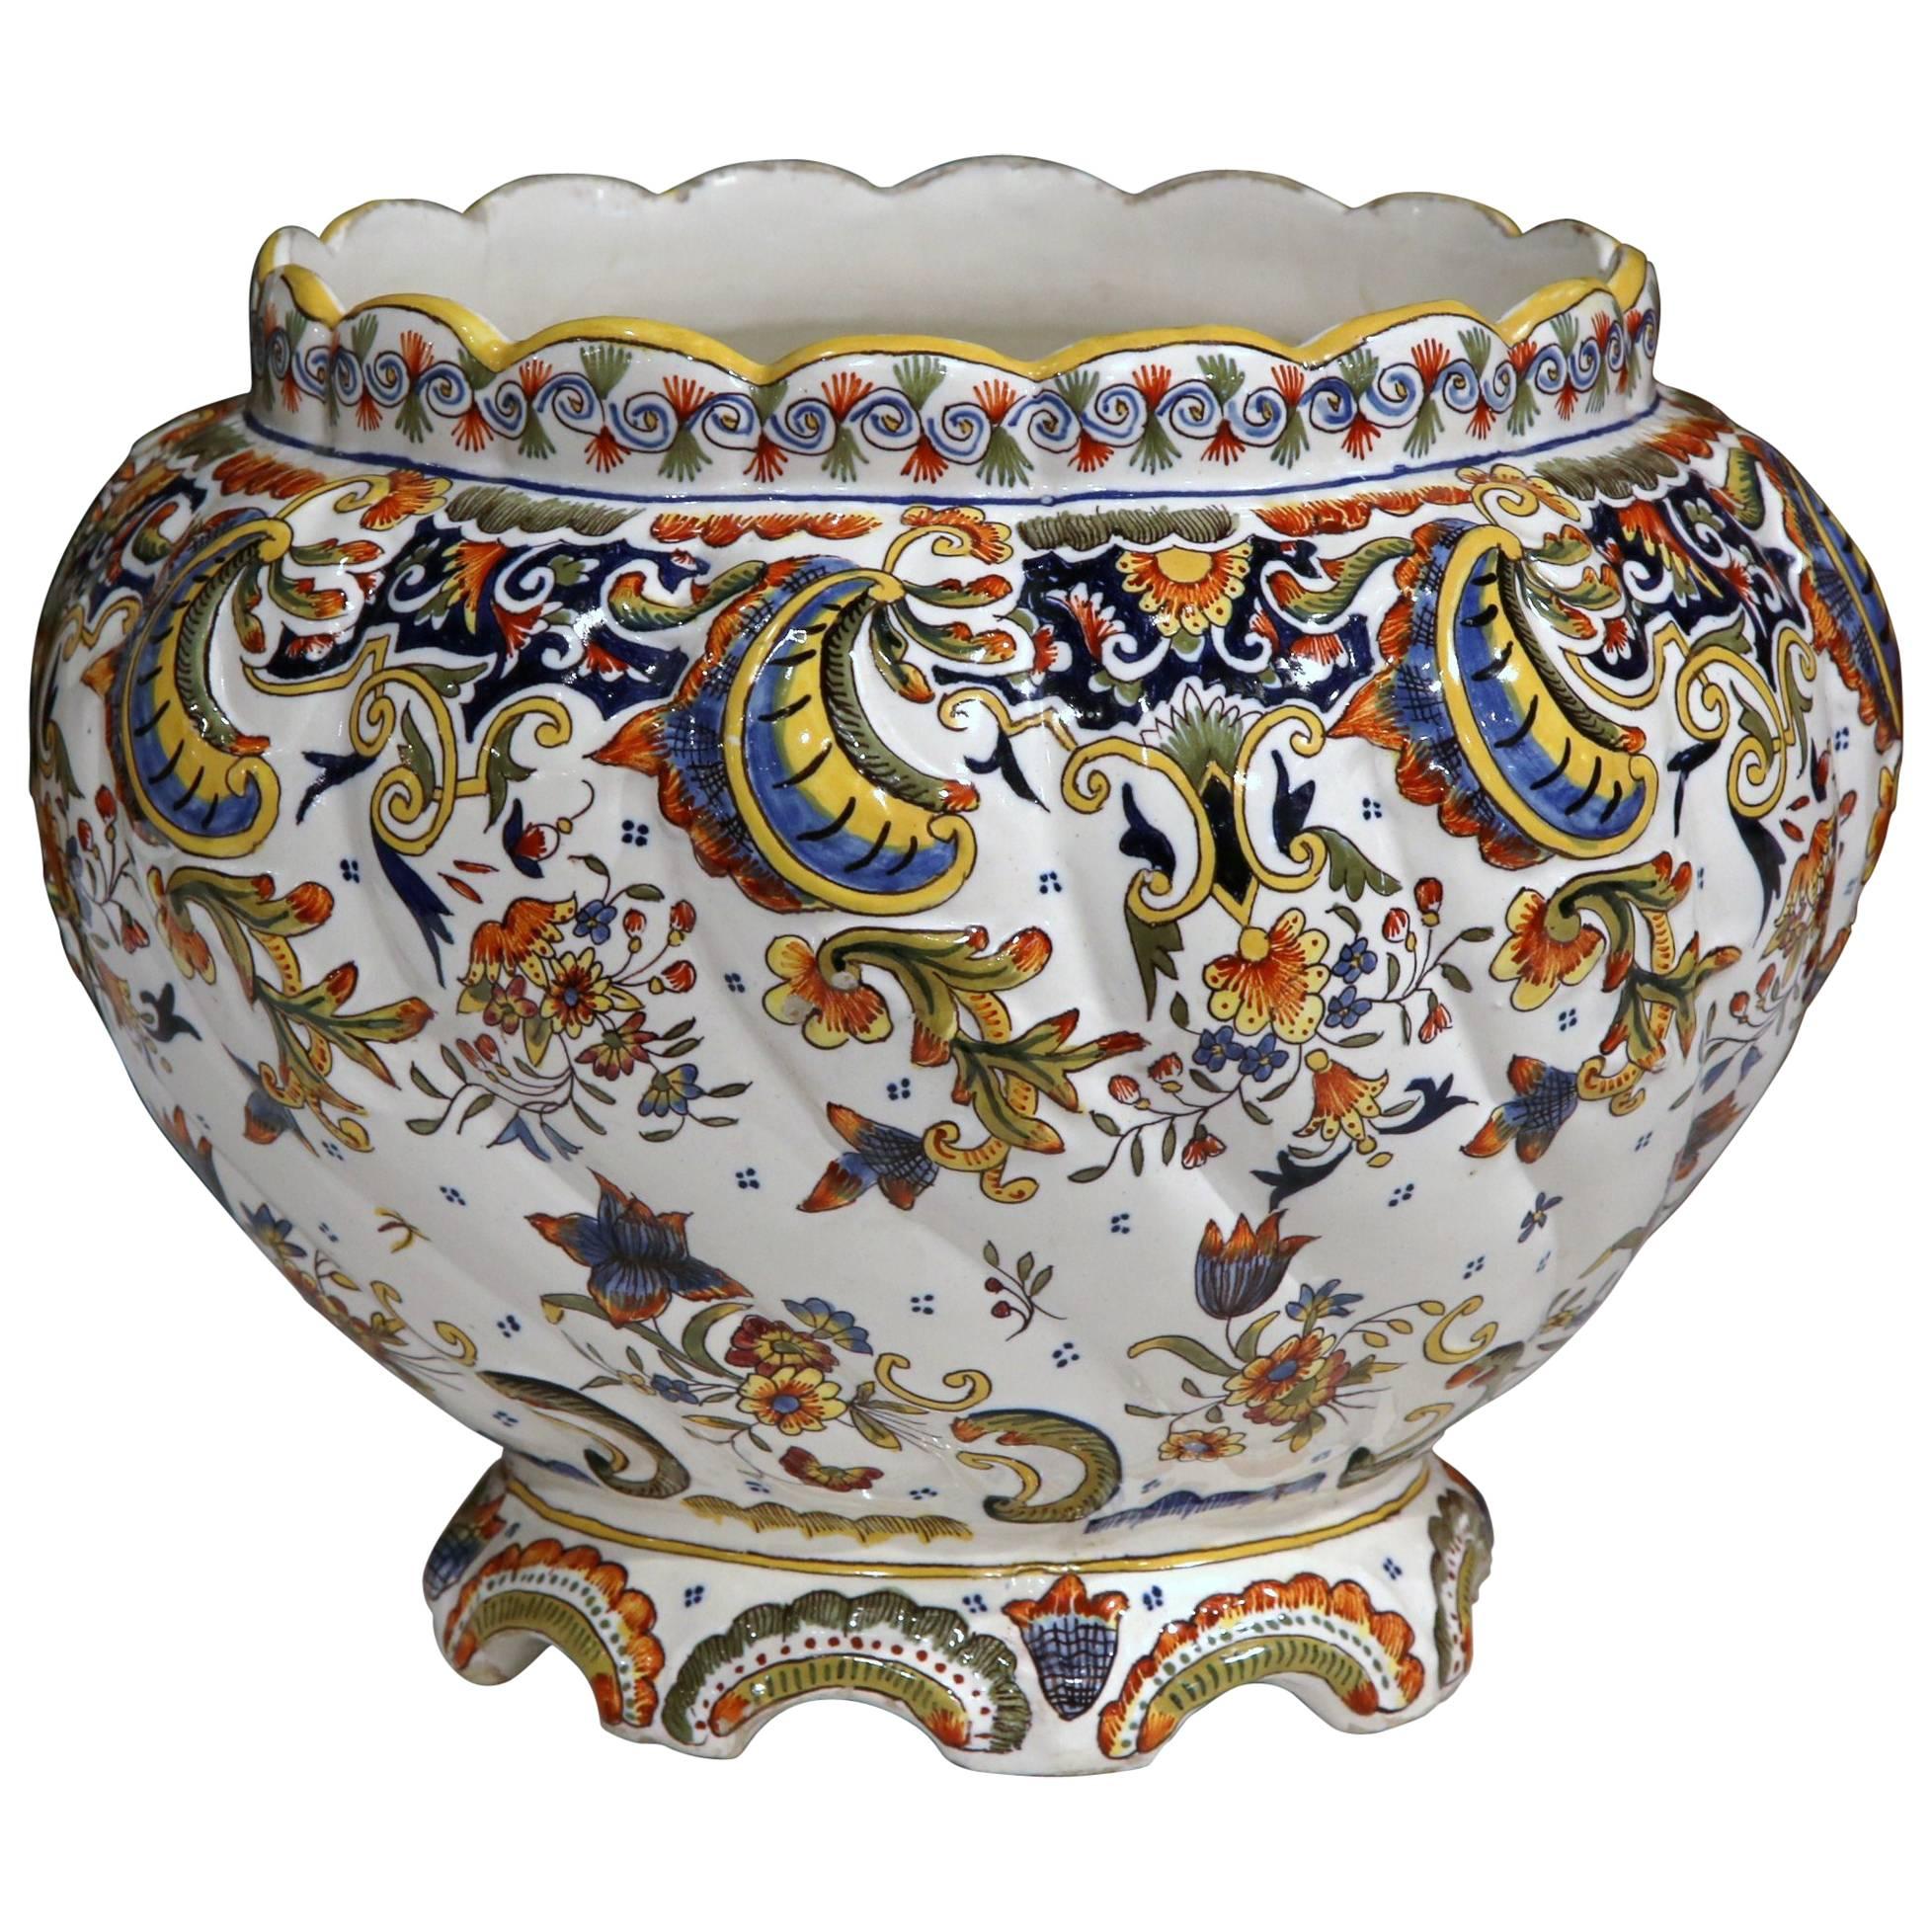 Early 20th Century, French Hand-Painted Ceramic Cache Pot from Normandy